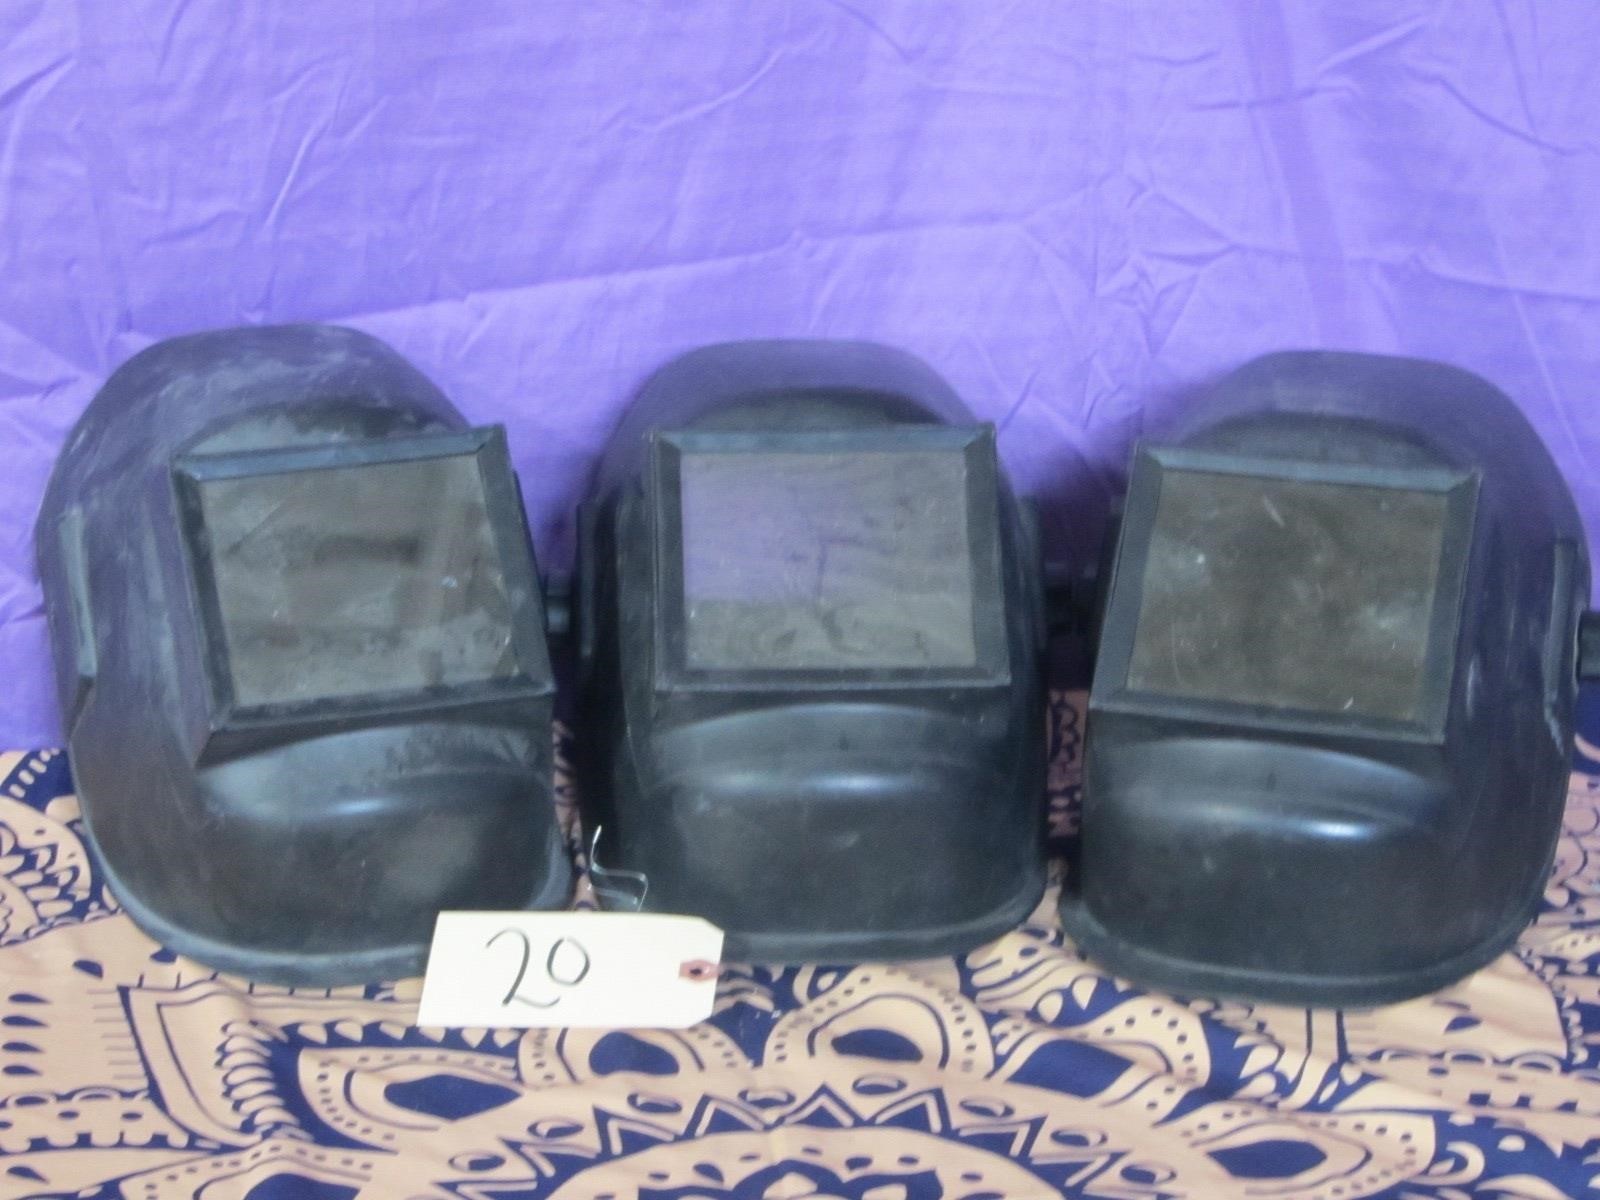 Qty 3 Used Welding / Grinding Helmets